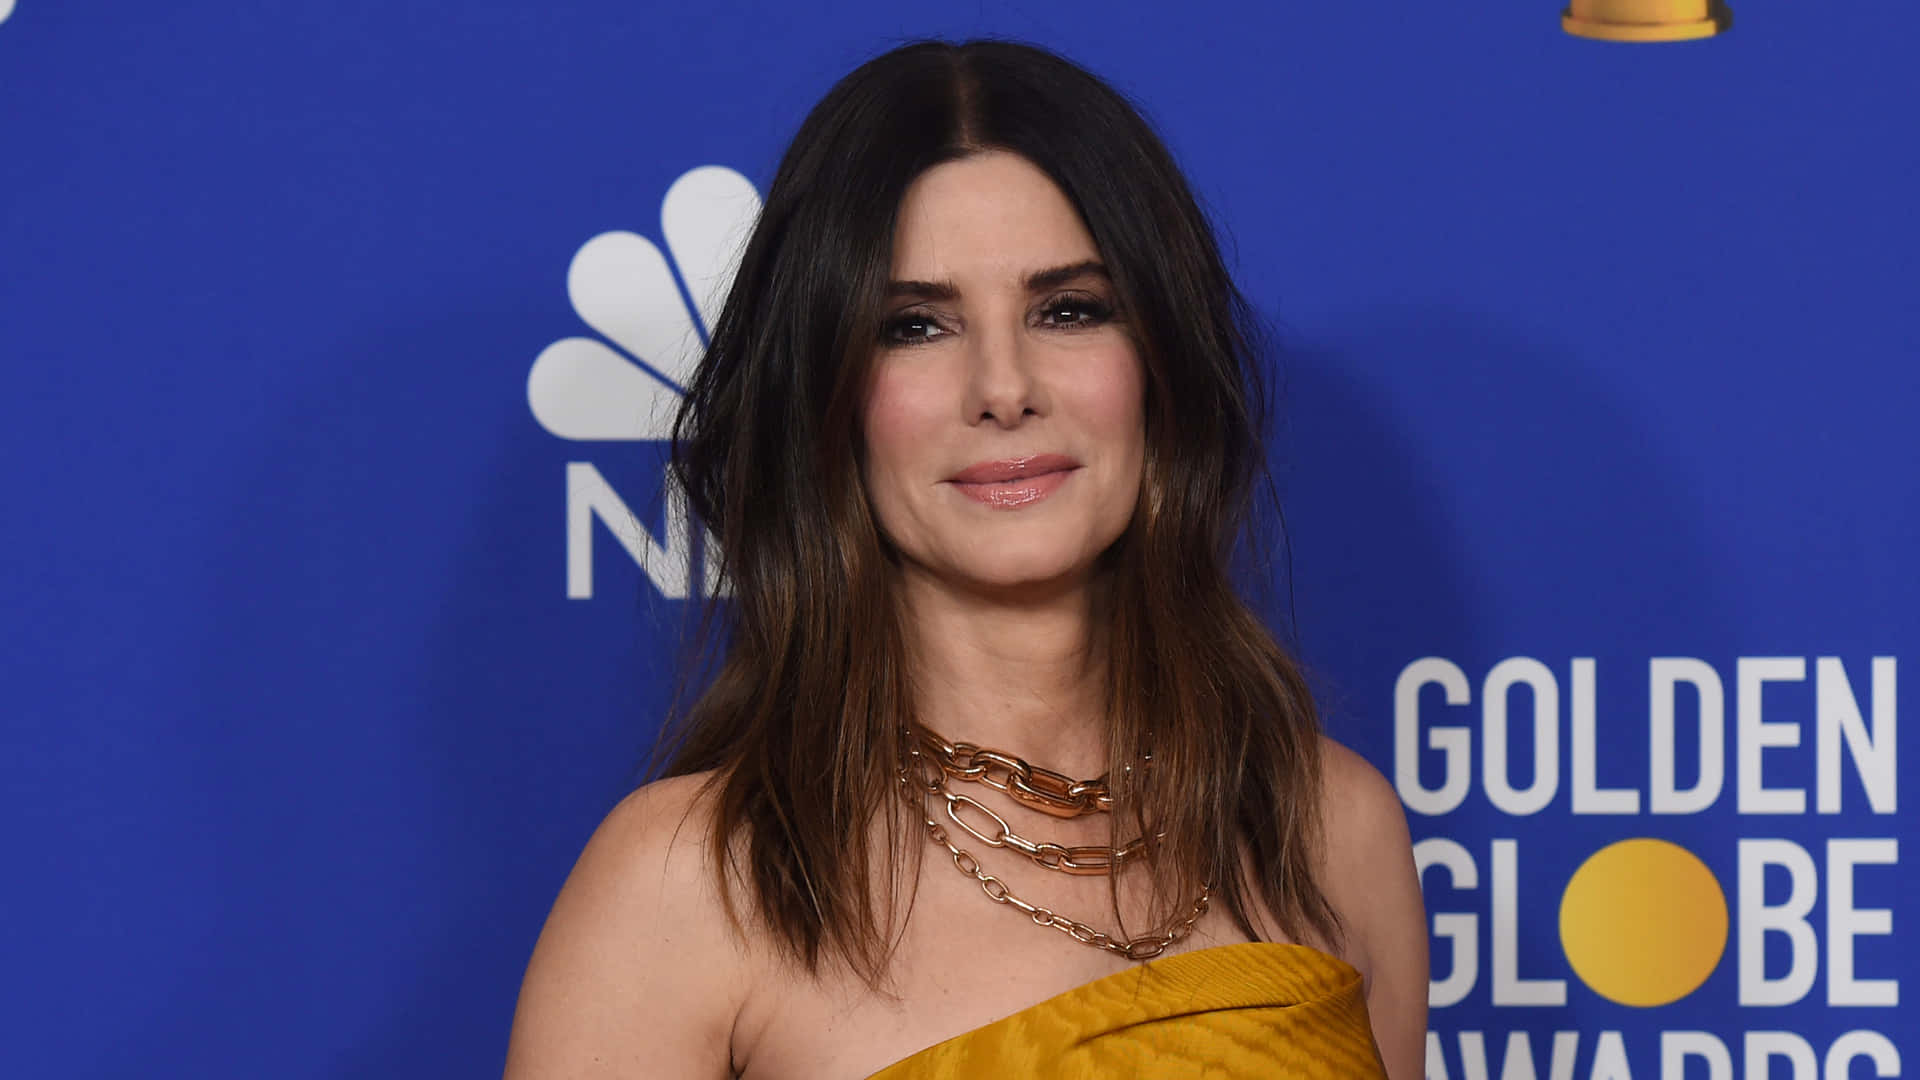 "Sandra Bullock in 2021: Ready To Take on The New Year"